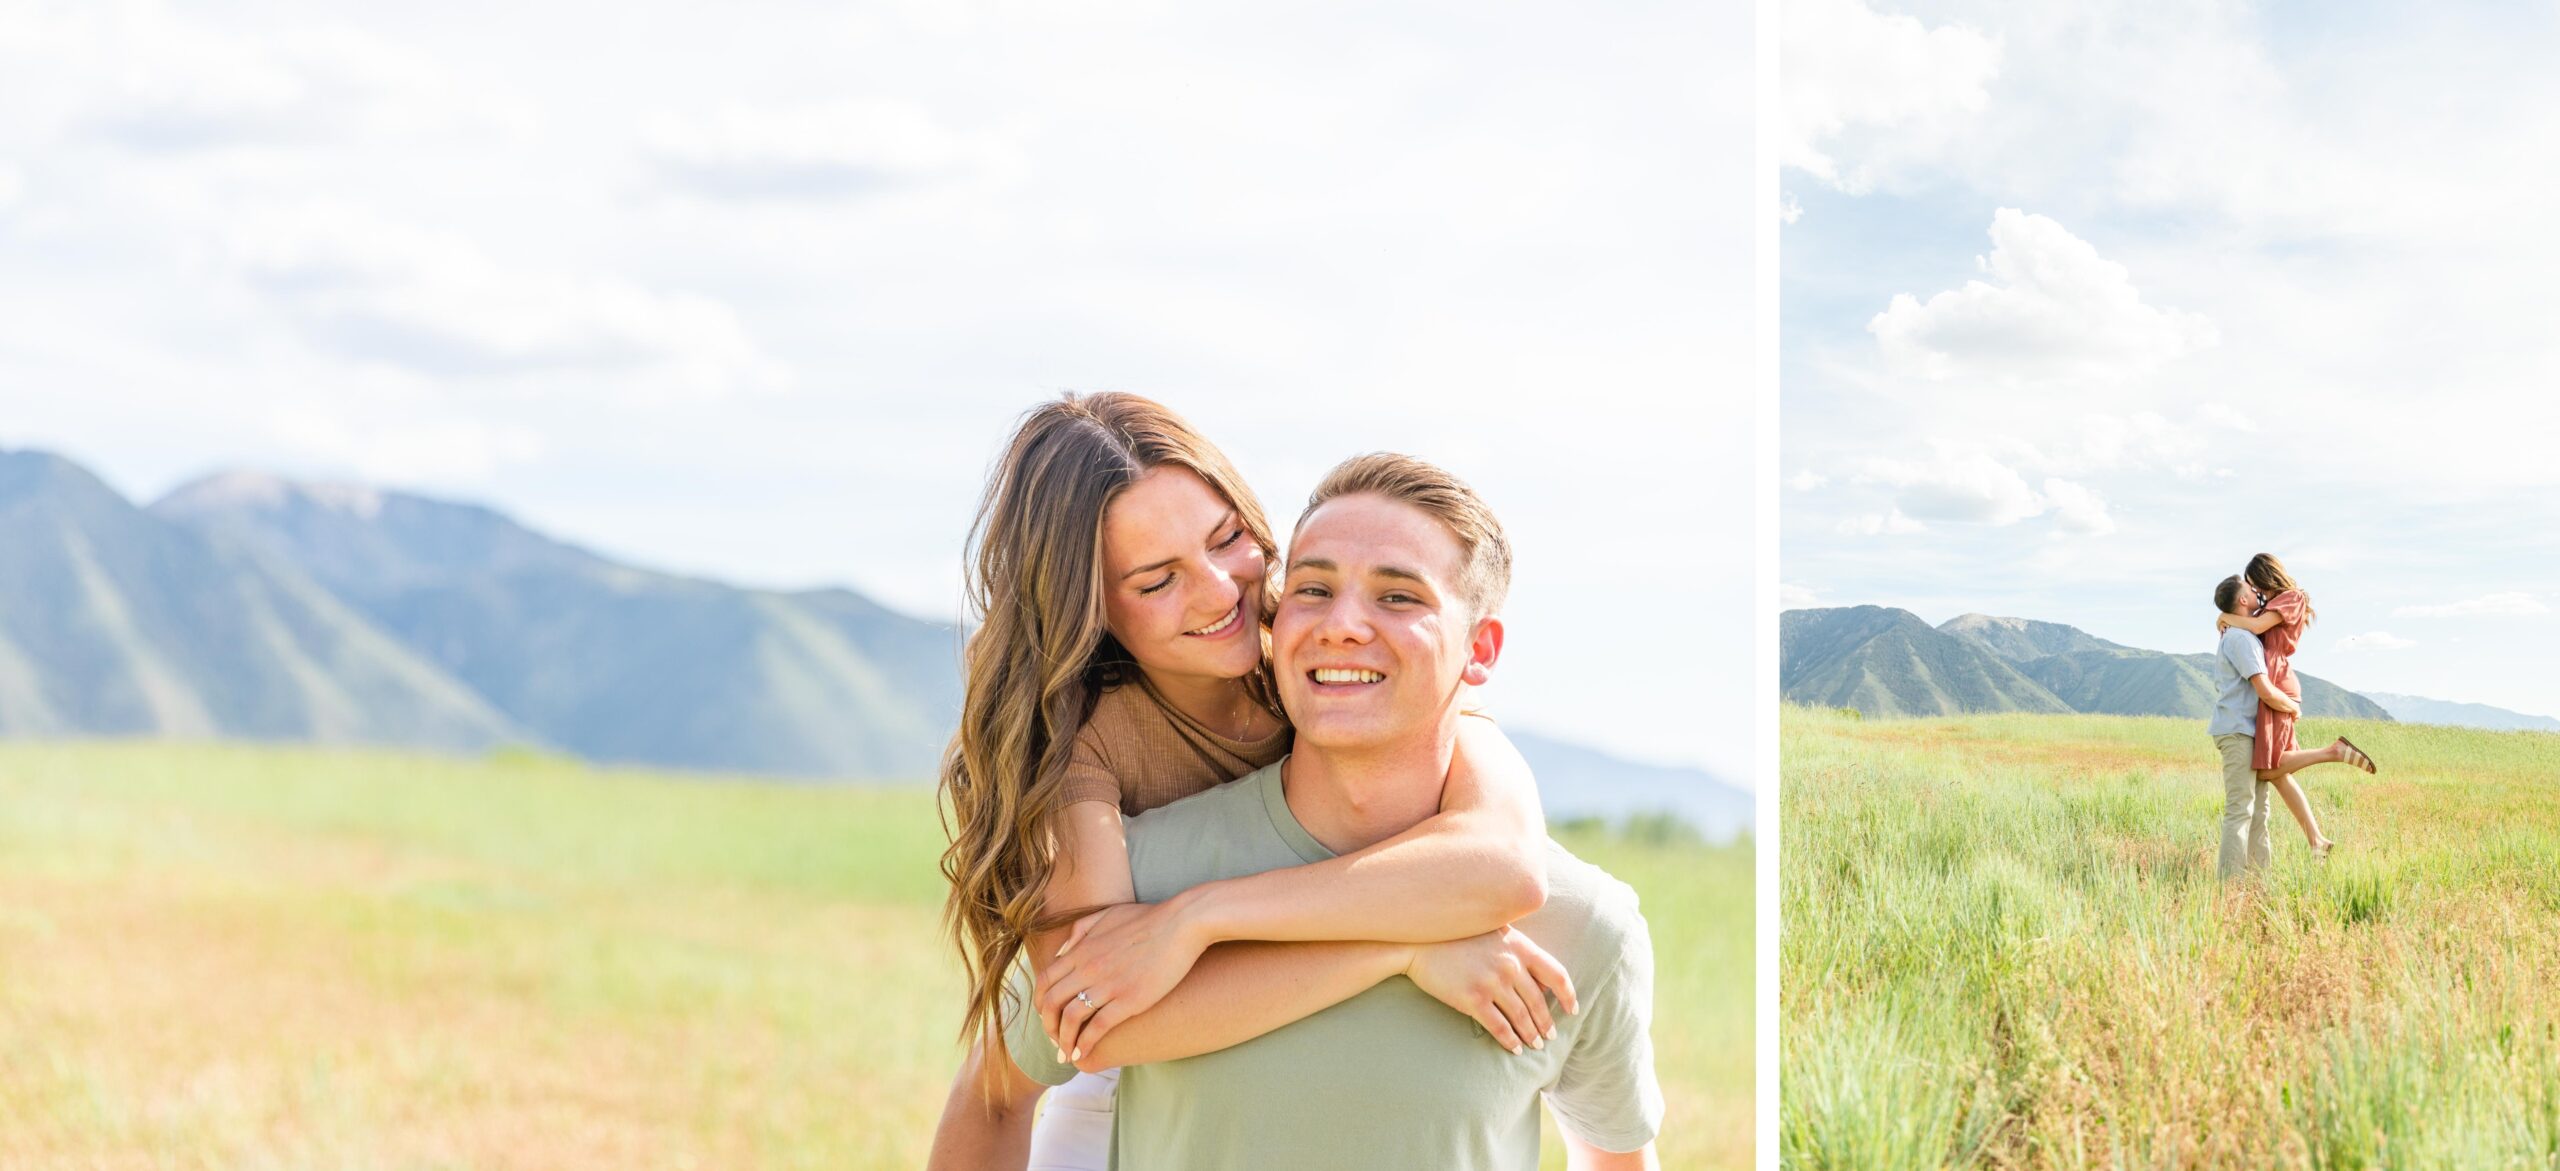 engagement photos in a utah field 